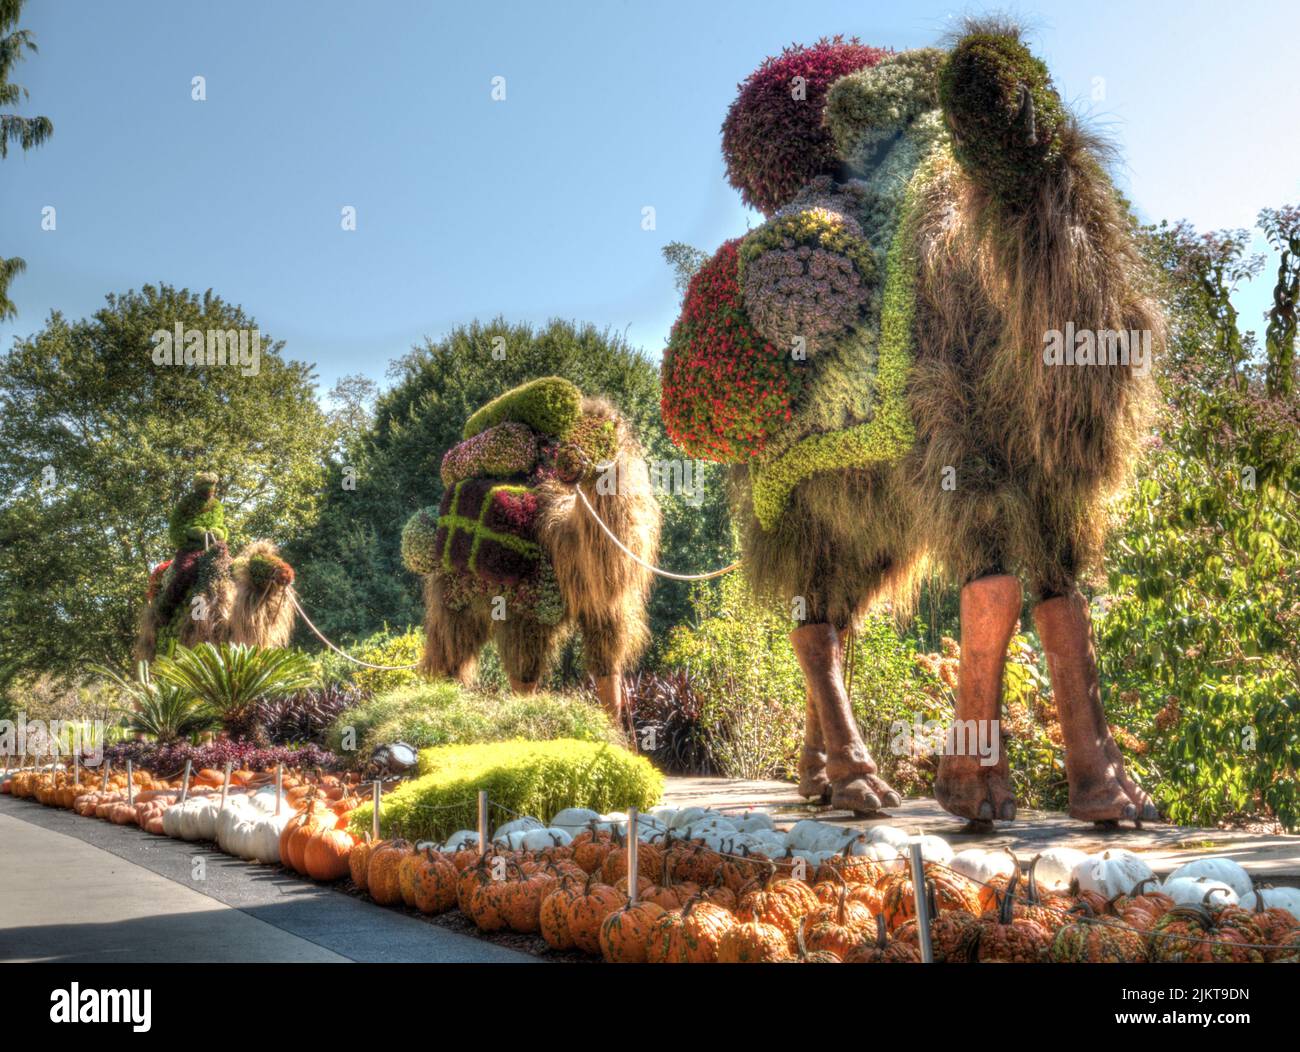 The Camel flower sculptures at the Atlanta Botanical Gardens in the USA Stock Photo